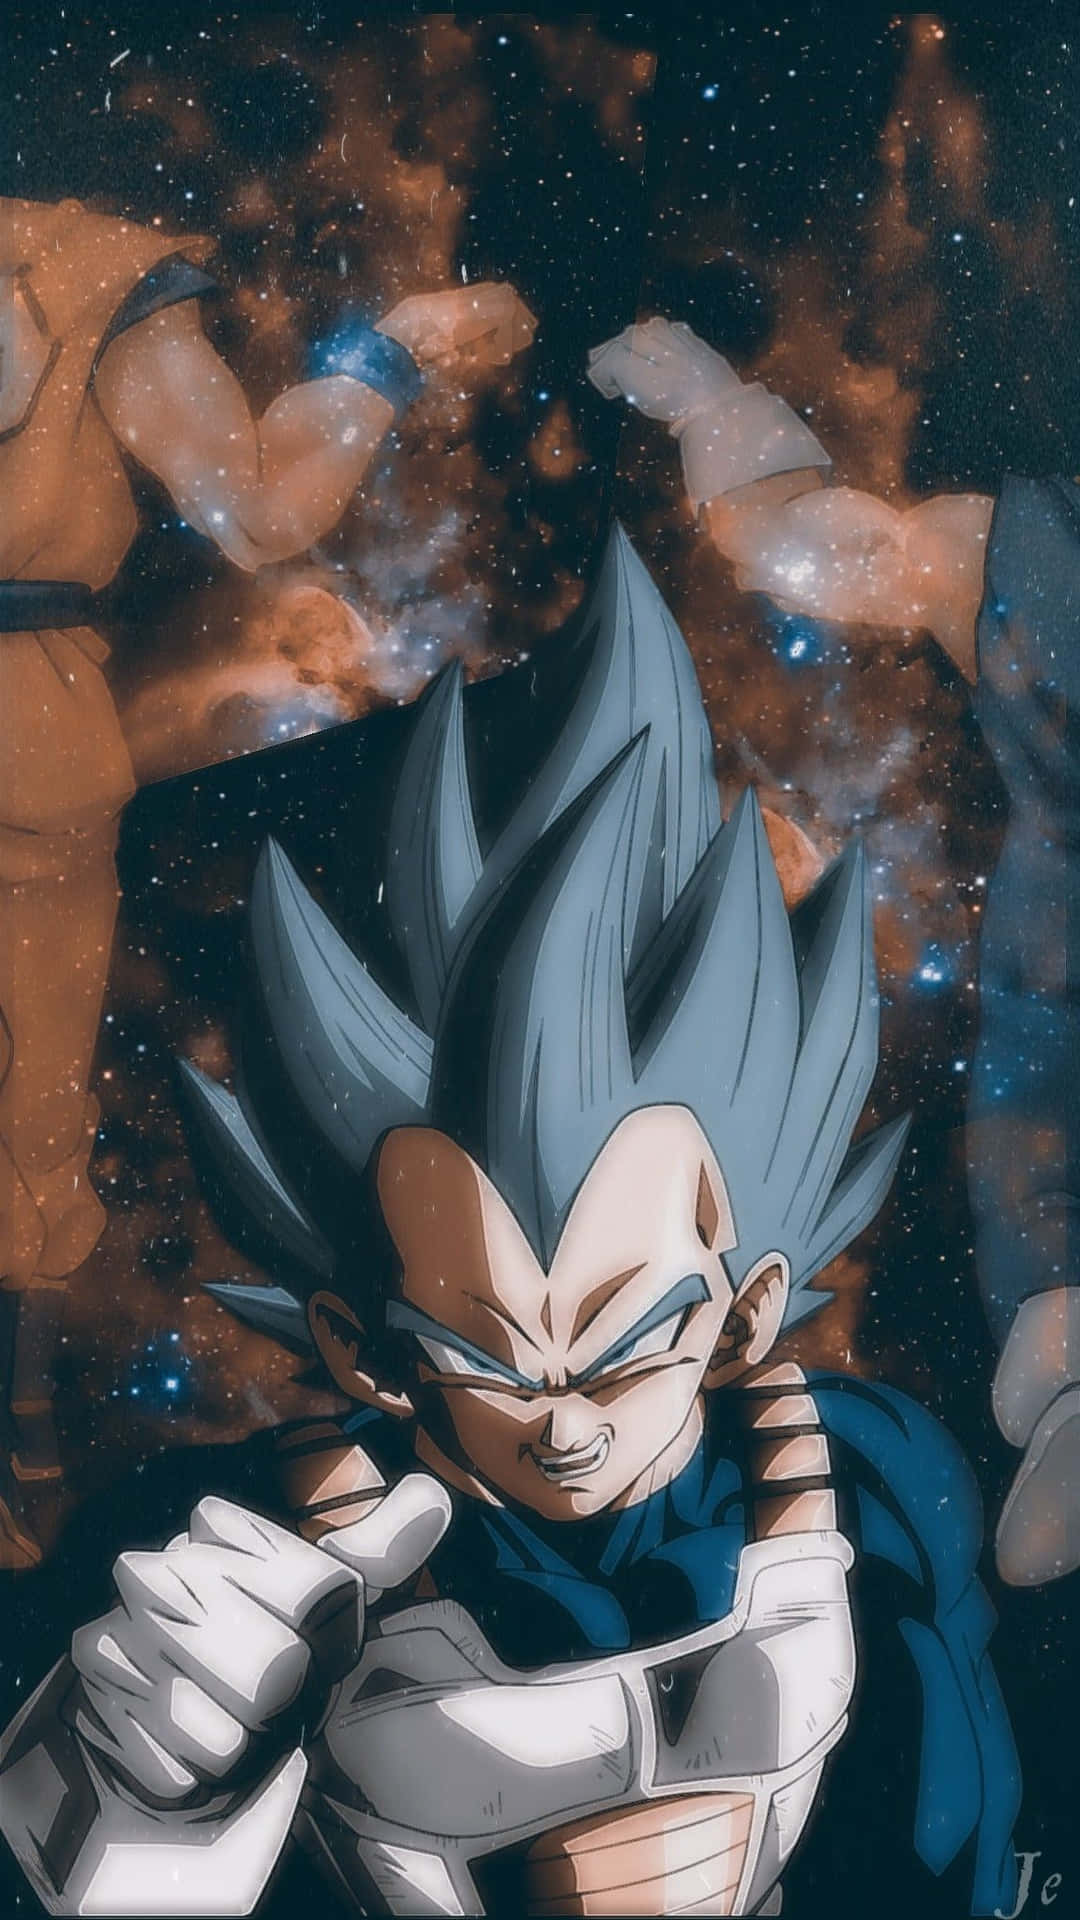 A powerful Vegeta unleashes his fury with a confident battle stance in this high-resolution background.